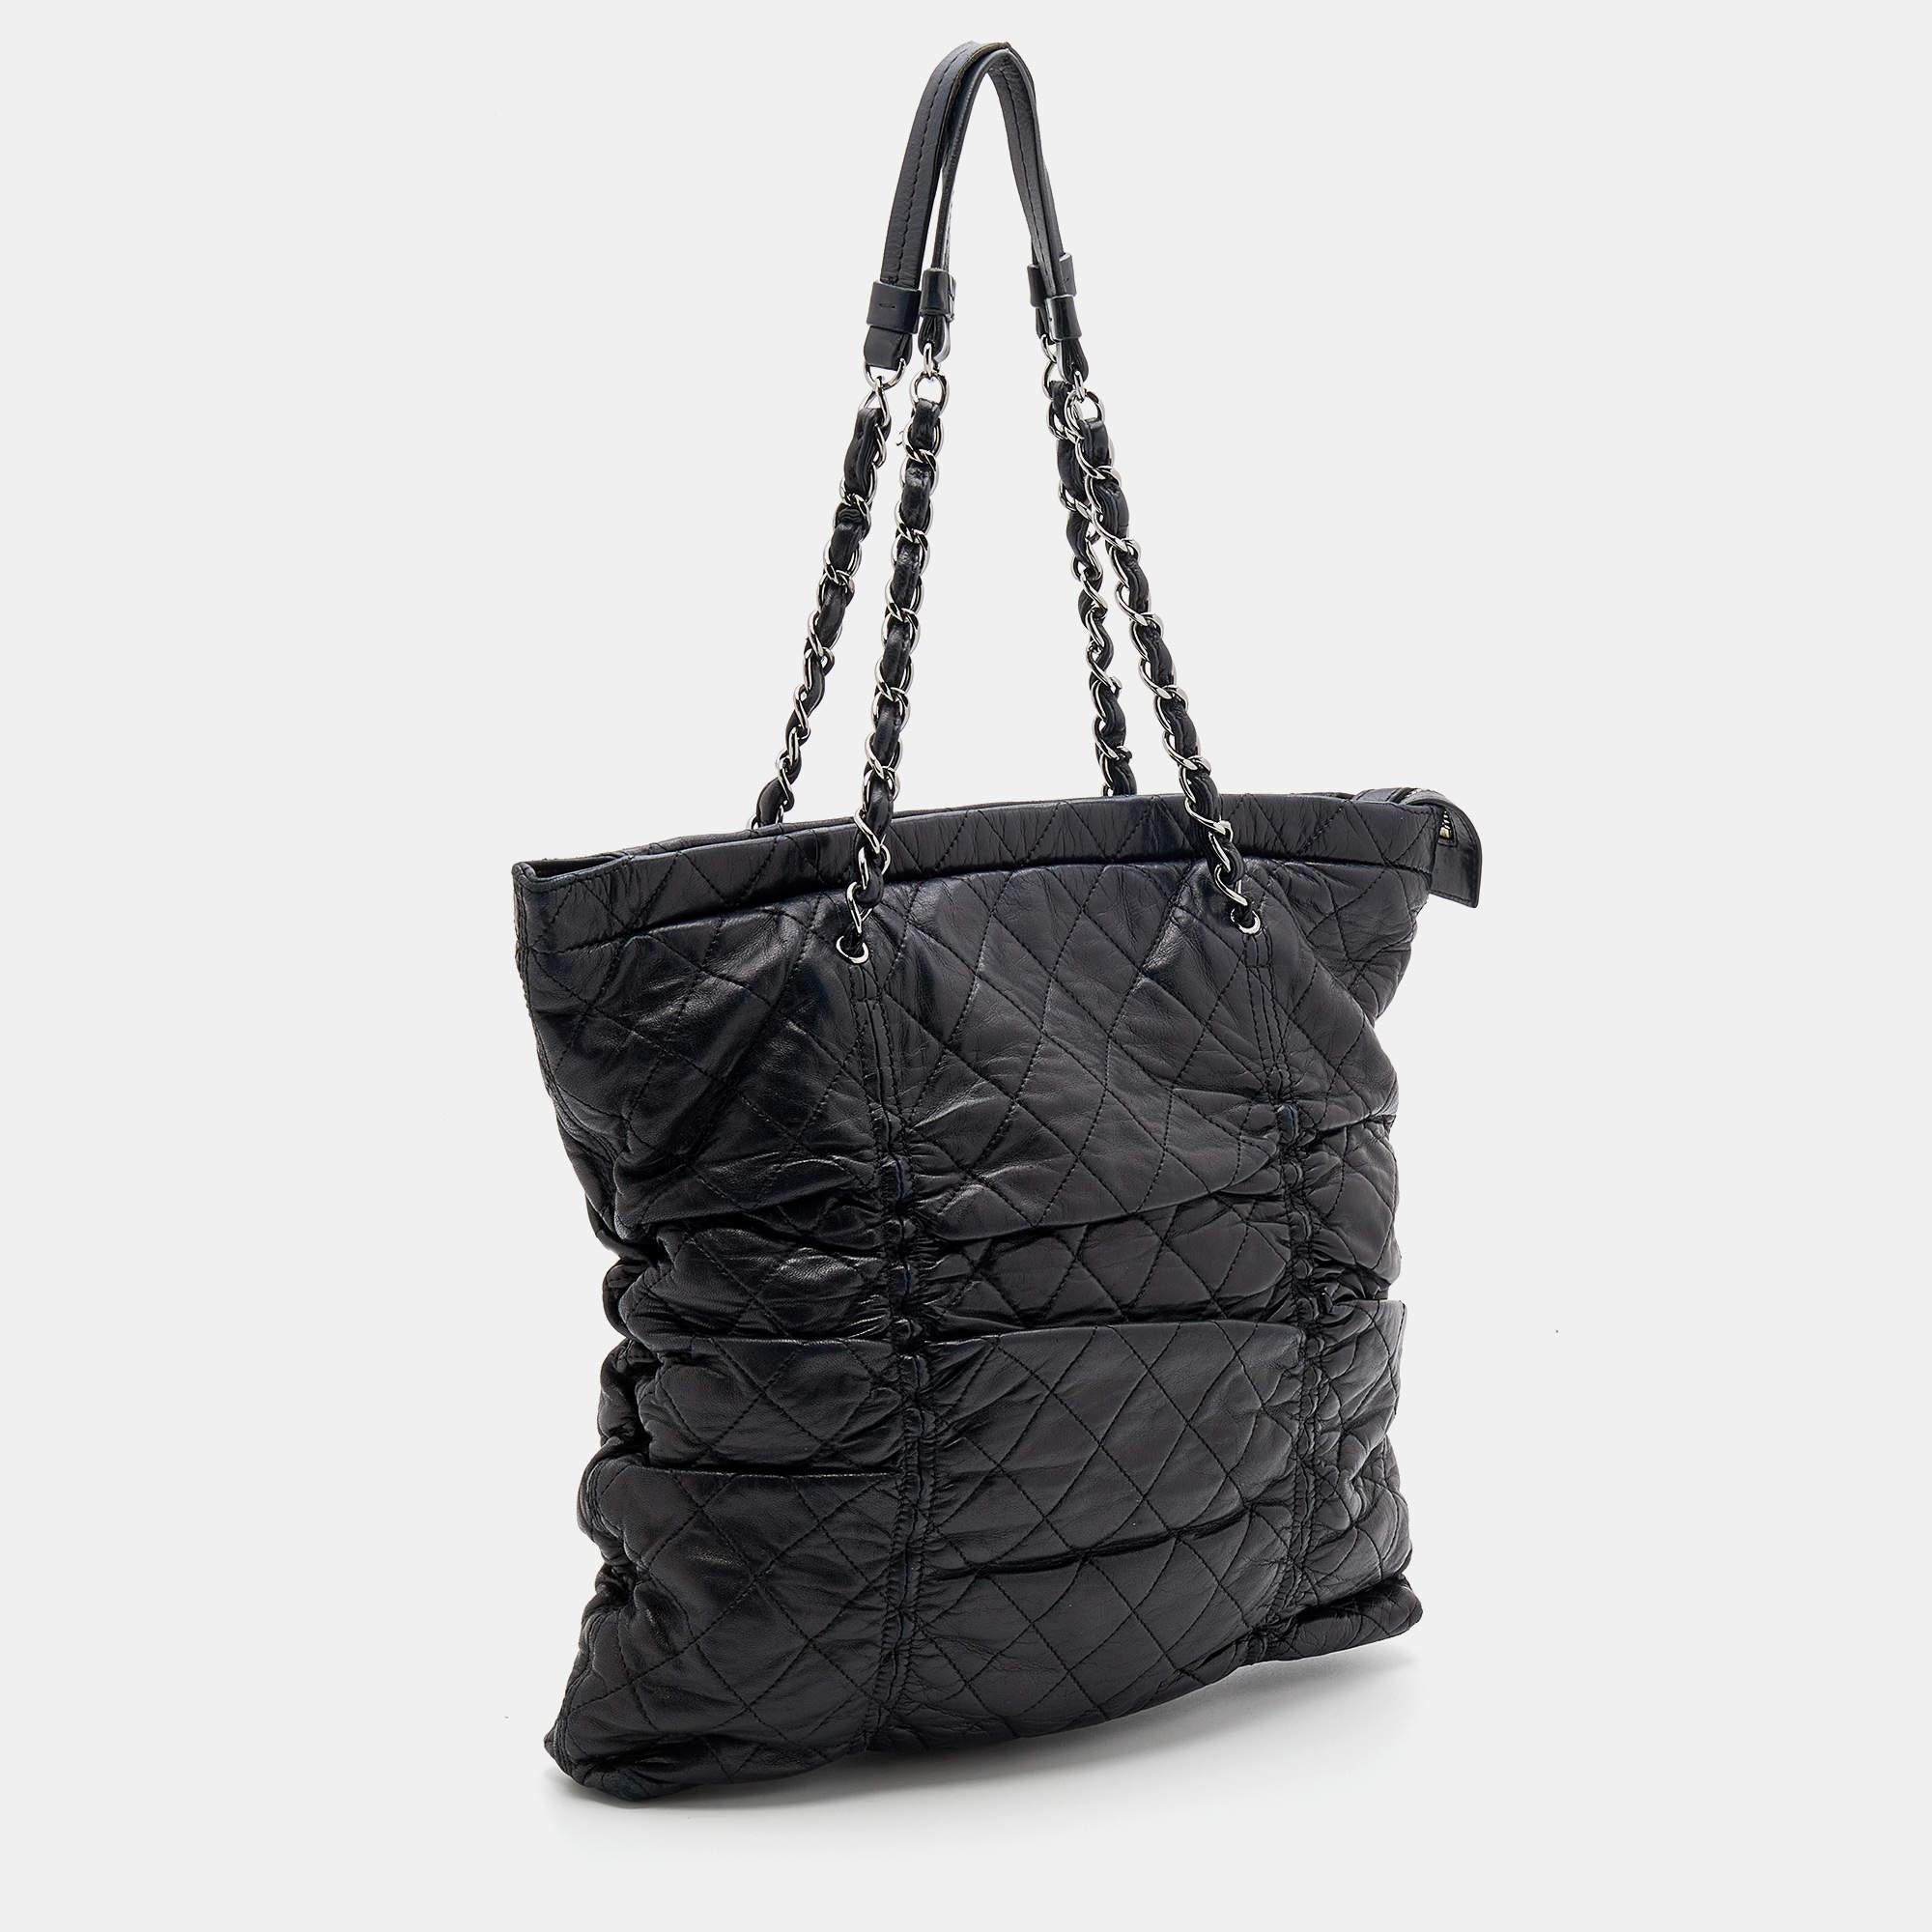 Women's Chanel Black Quilted Leather Sharpei Tote